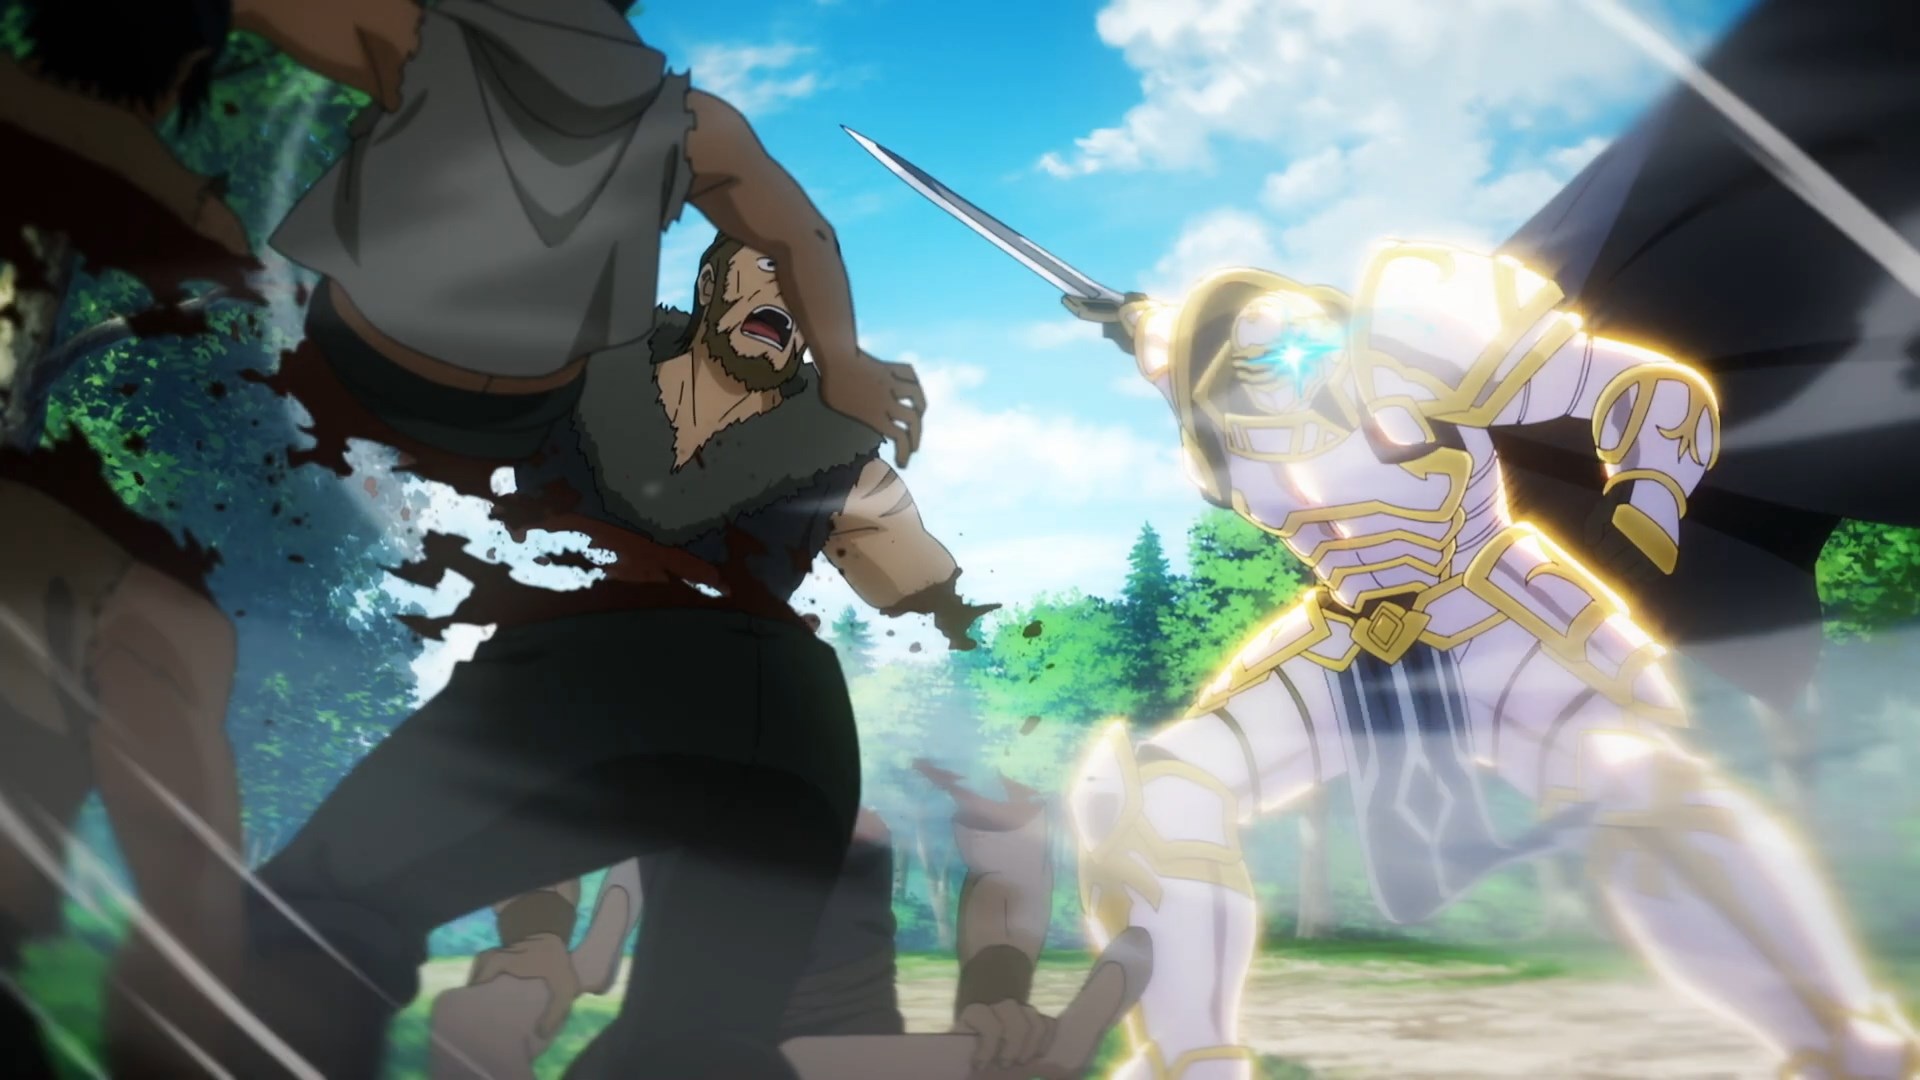 Skeleton Knight in Another World PV Rescues Maidens From Peril.